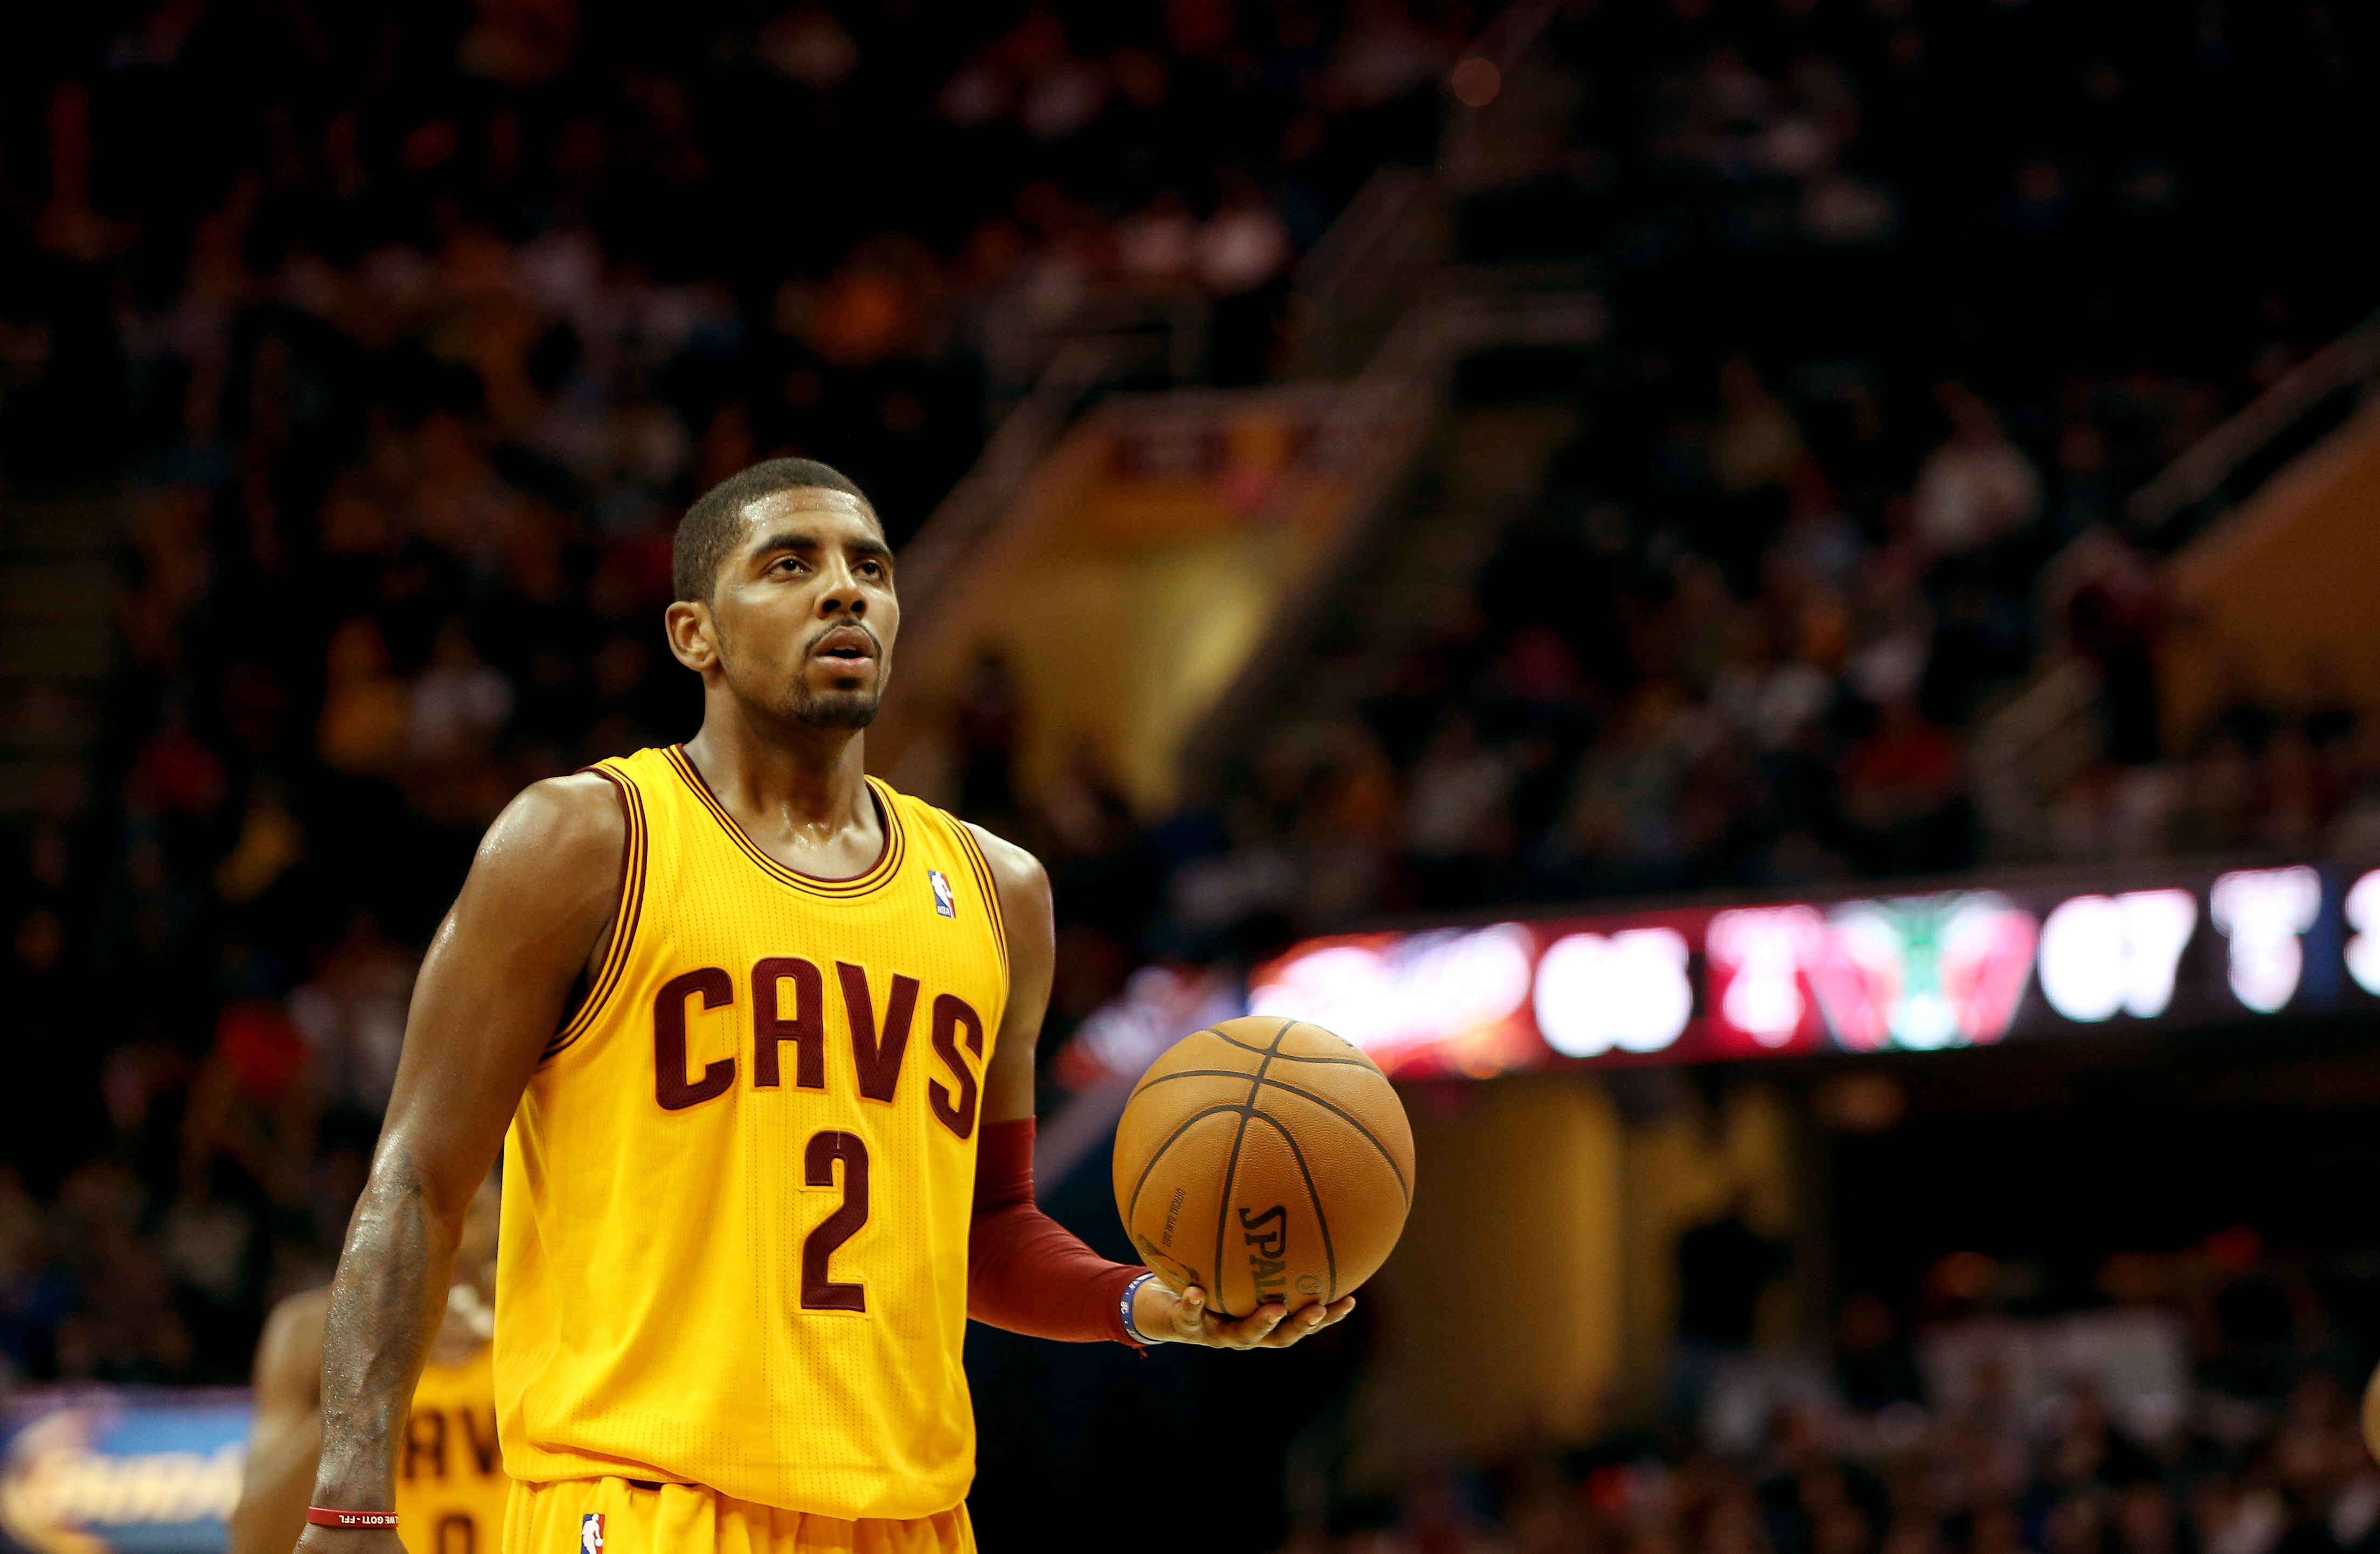 Kyrie Irving plots his next move.